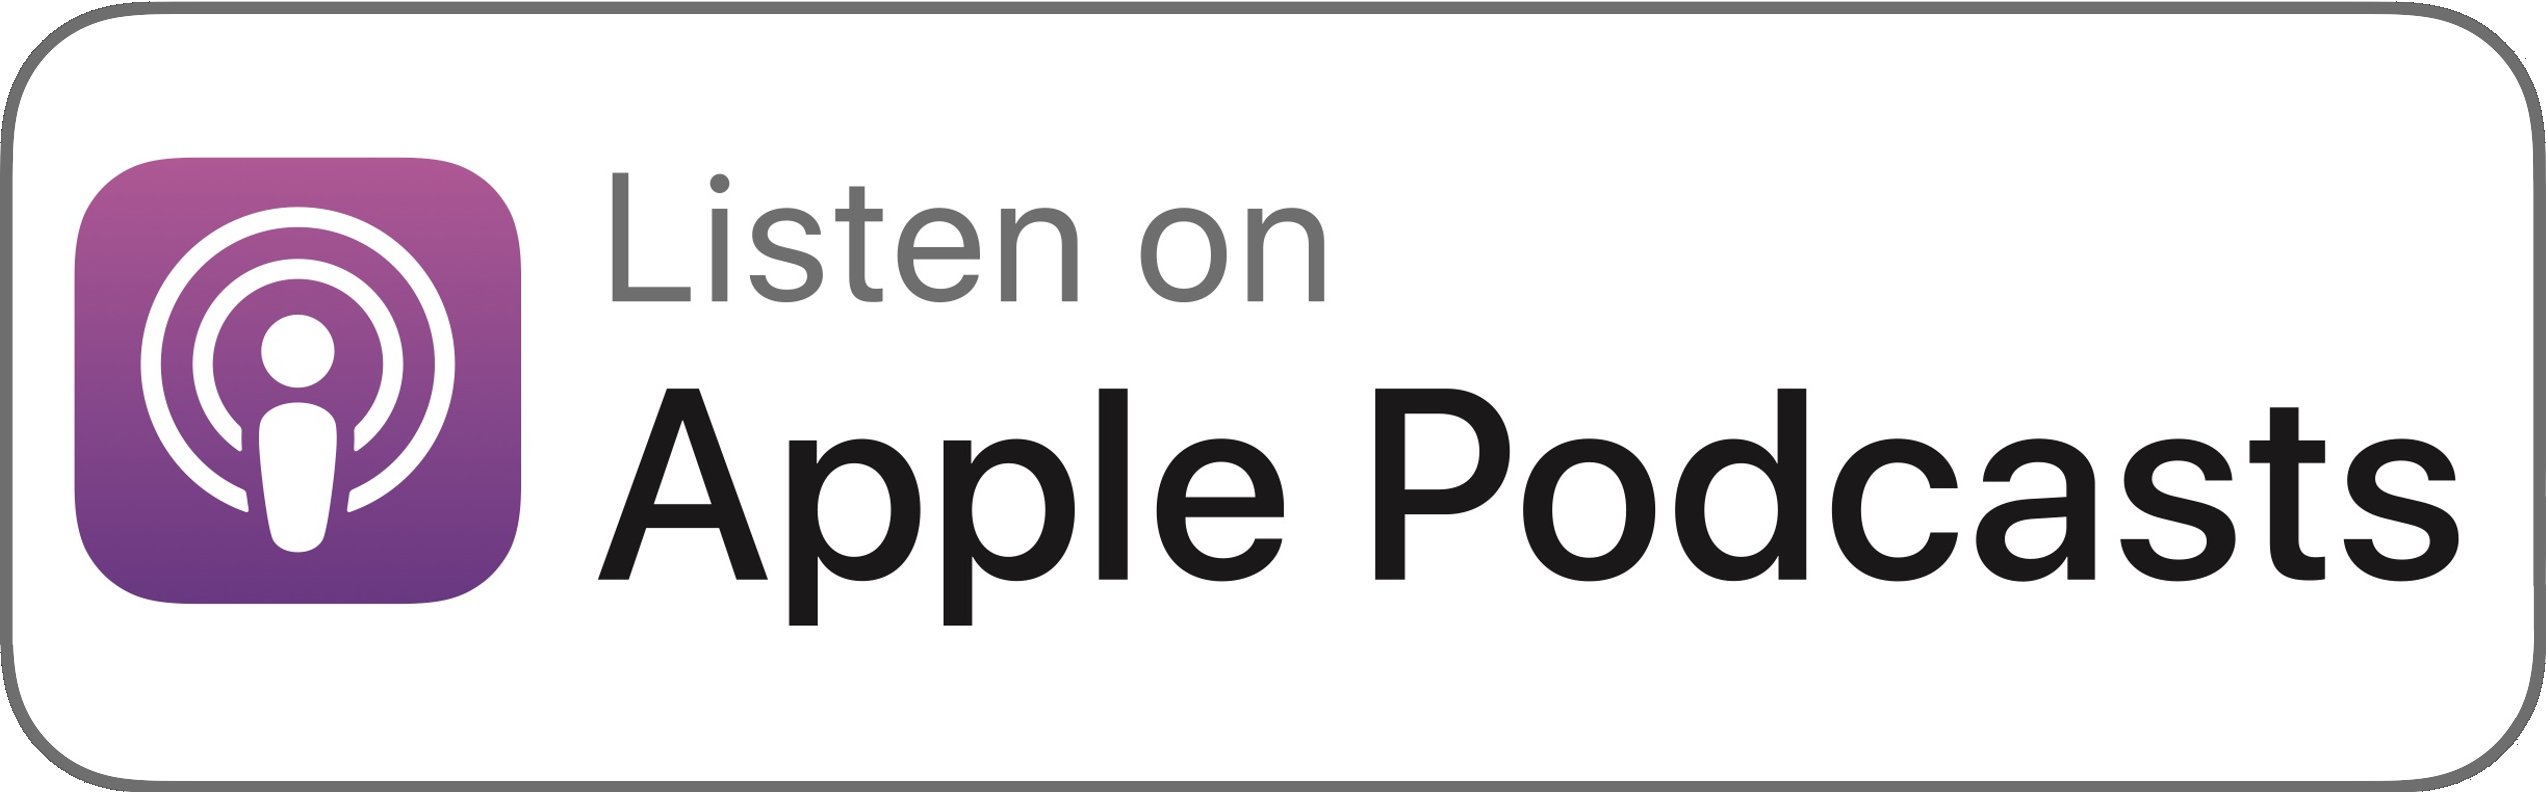 subscribe to apple podcasts